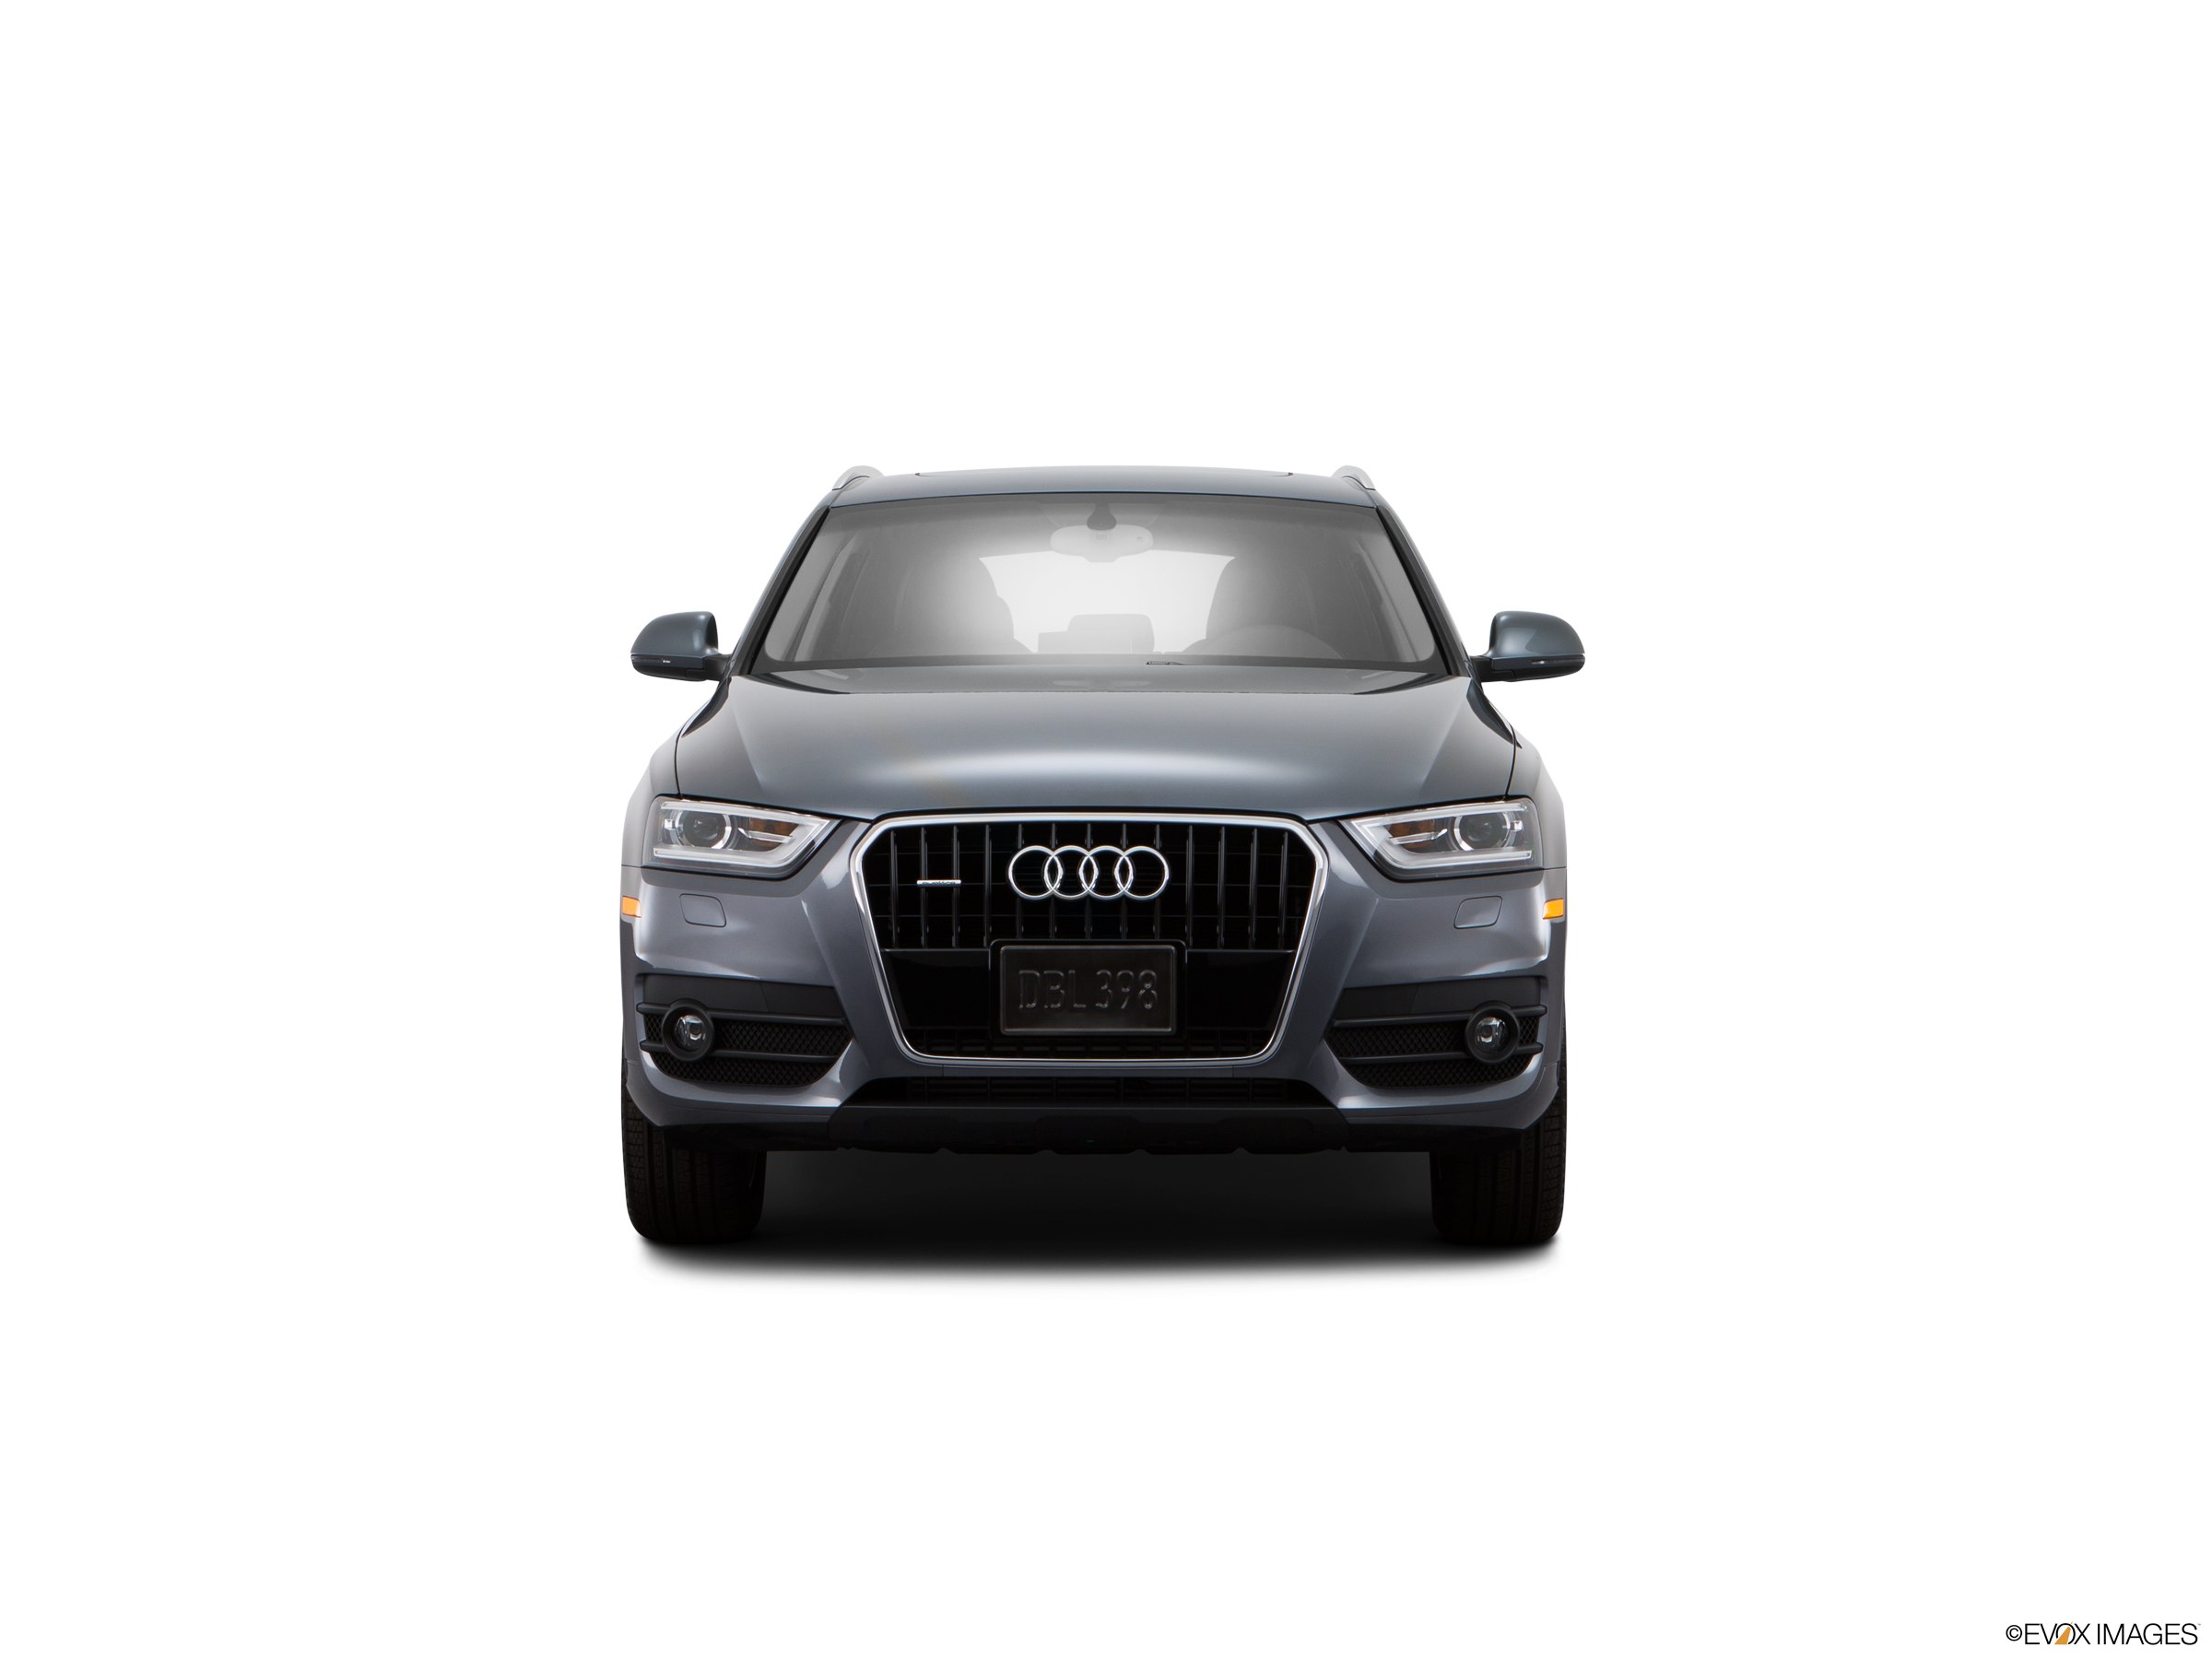 2015 Audi Q3 Prices, Reviews, and Photos - MotorTrend